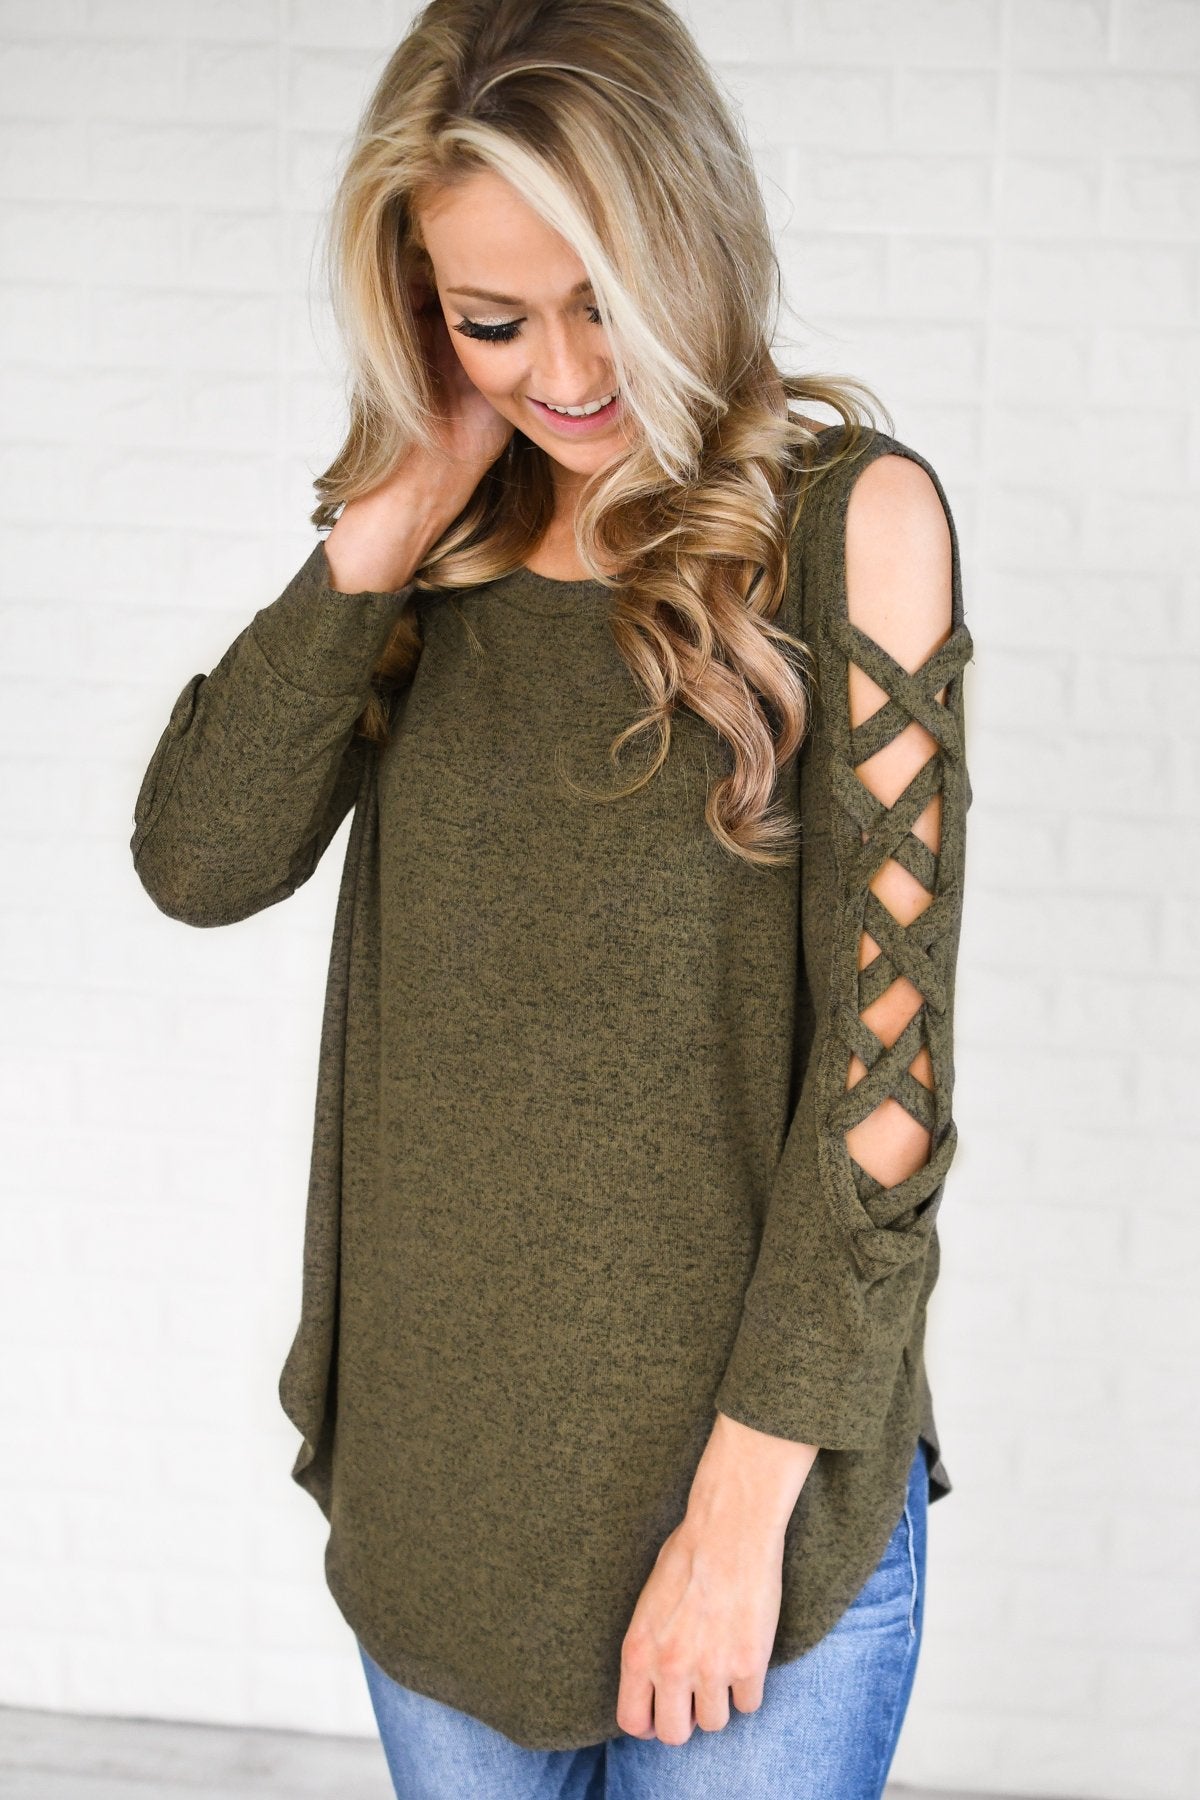 The One For Me Shoulder Detail Top - Olive – The Pulse Boutique